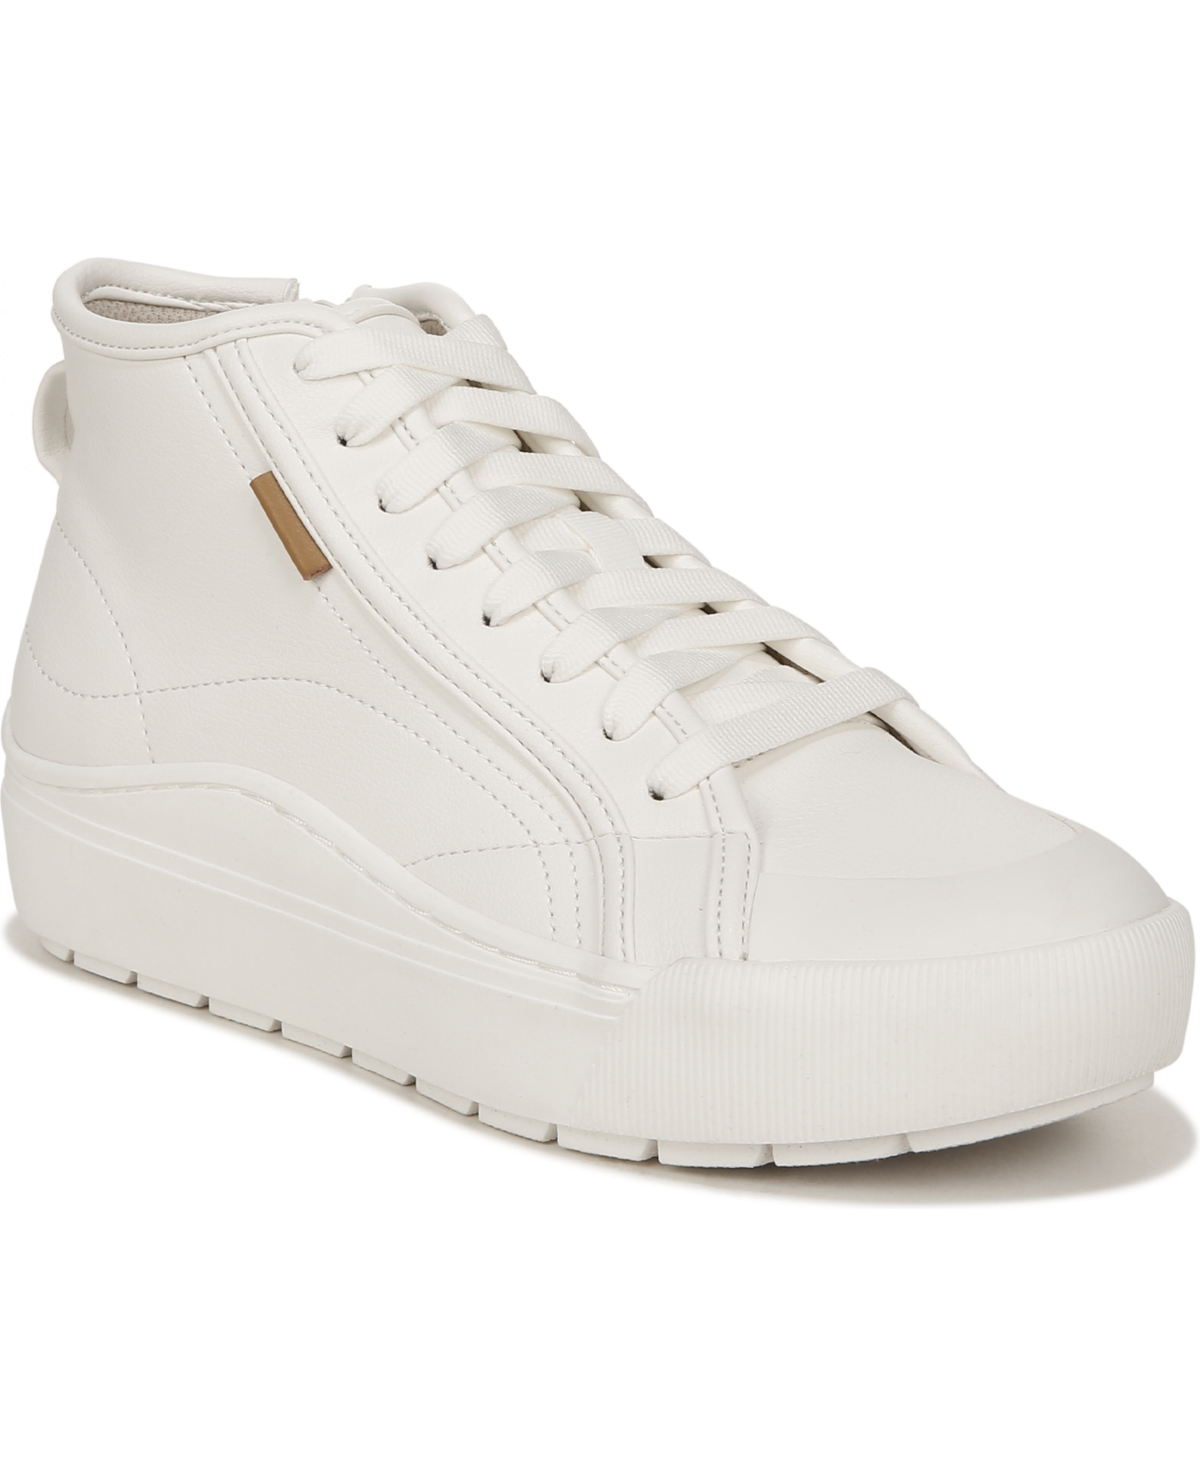 Dr. Scholl's Women's Time Off Hi2 Platform Sneakers In White Faux Leather